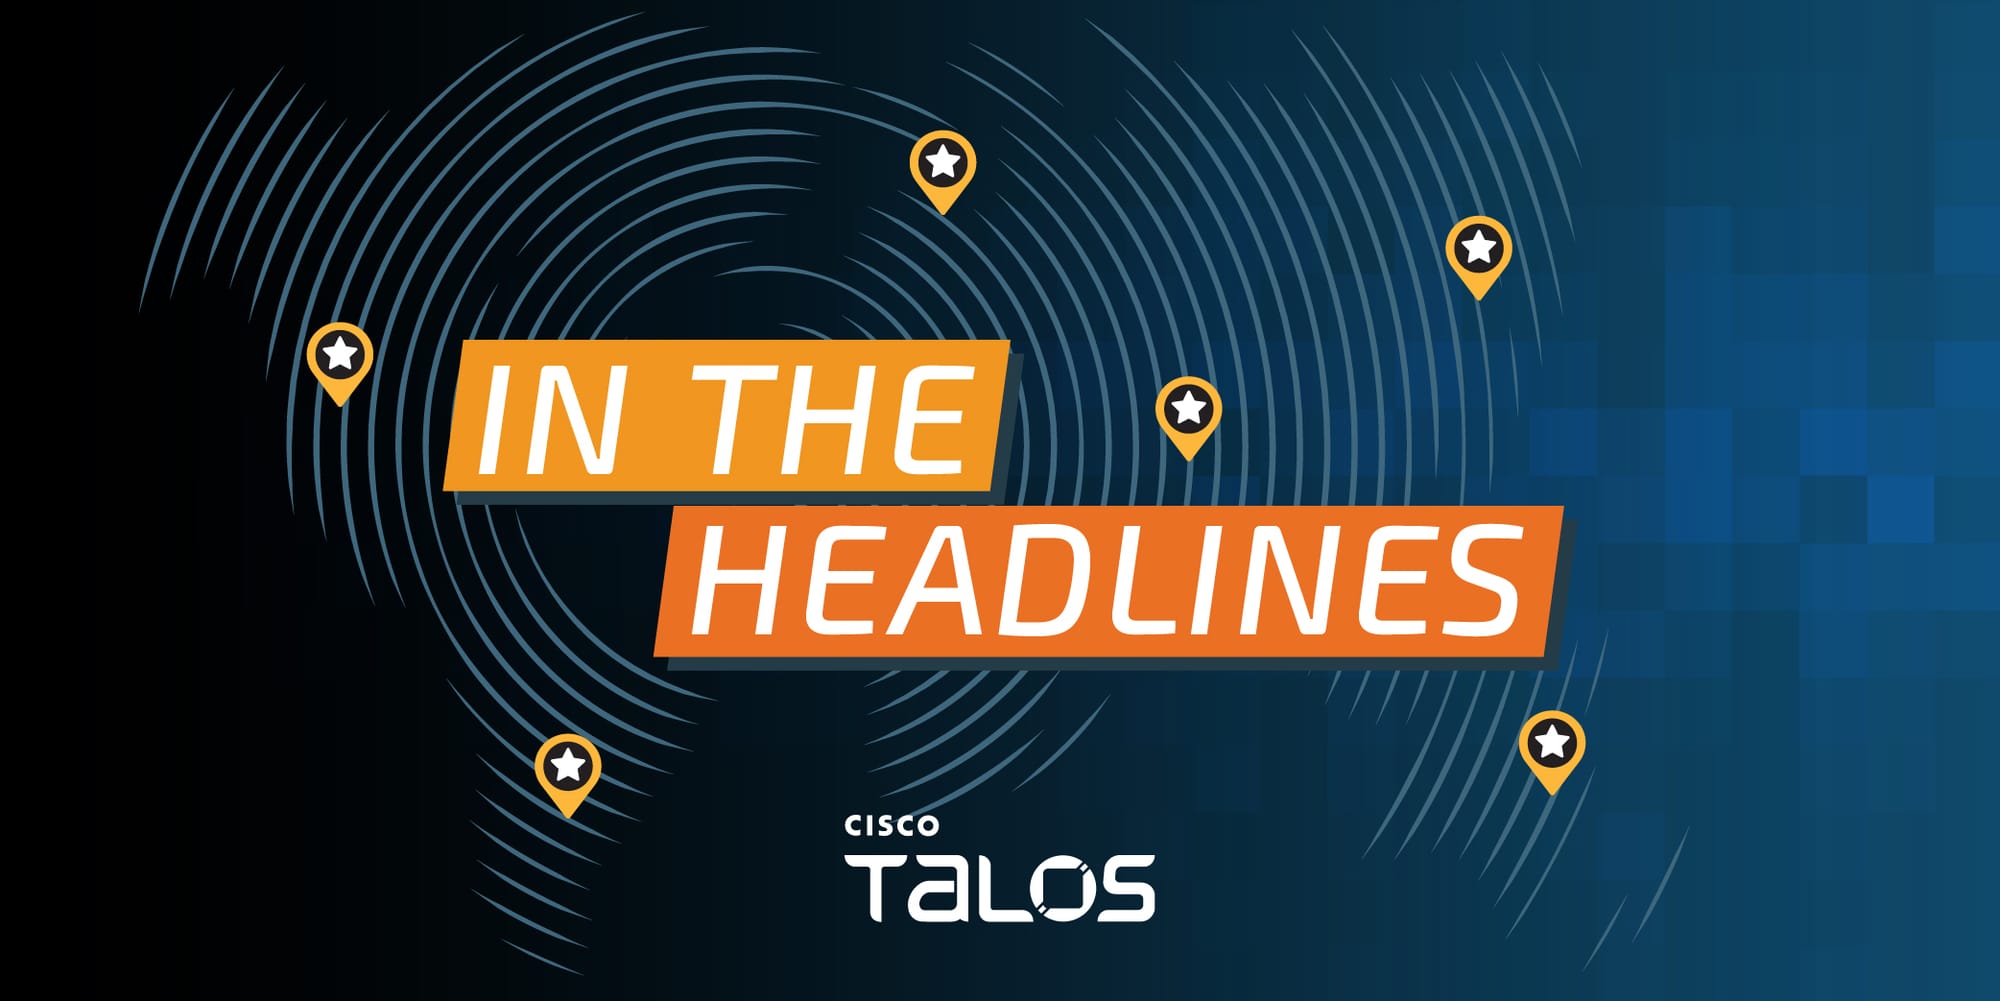 Talos joins CISA to counter cyber threats against non-profits, activists and other at-risk communities